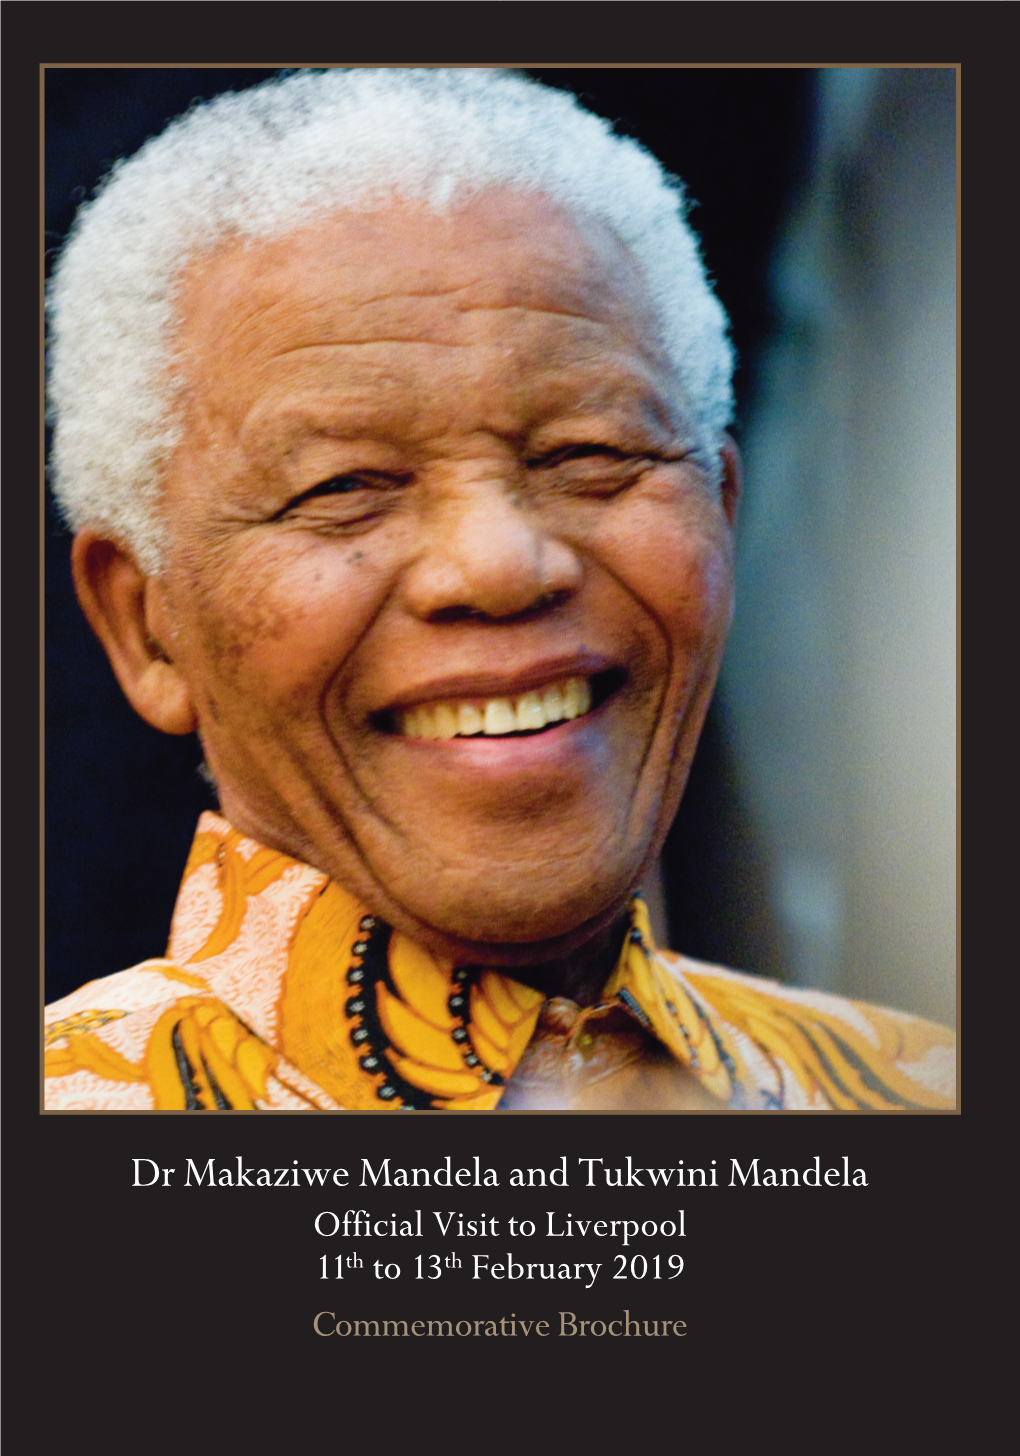 Dr Makaziwe Mandela and Tukwini Mandela Official Visit to Liverpool 11Th to 13 Th February 2019 Commemorative Brochure Mandela Combro:Layout 1 5/2/19 21:30 Page 2